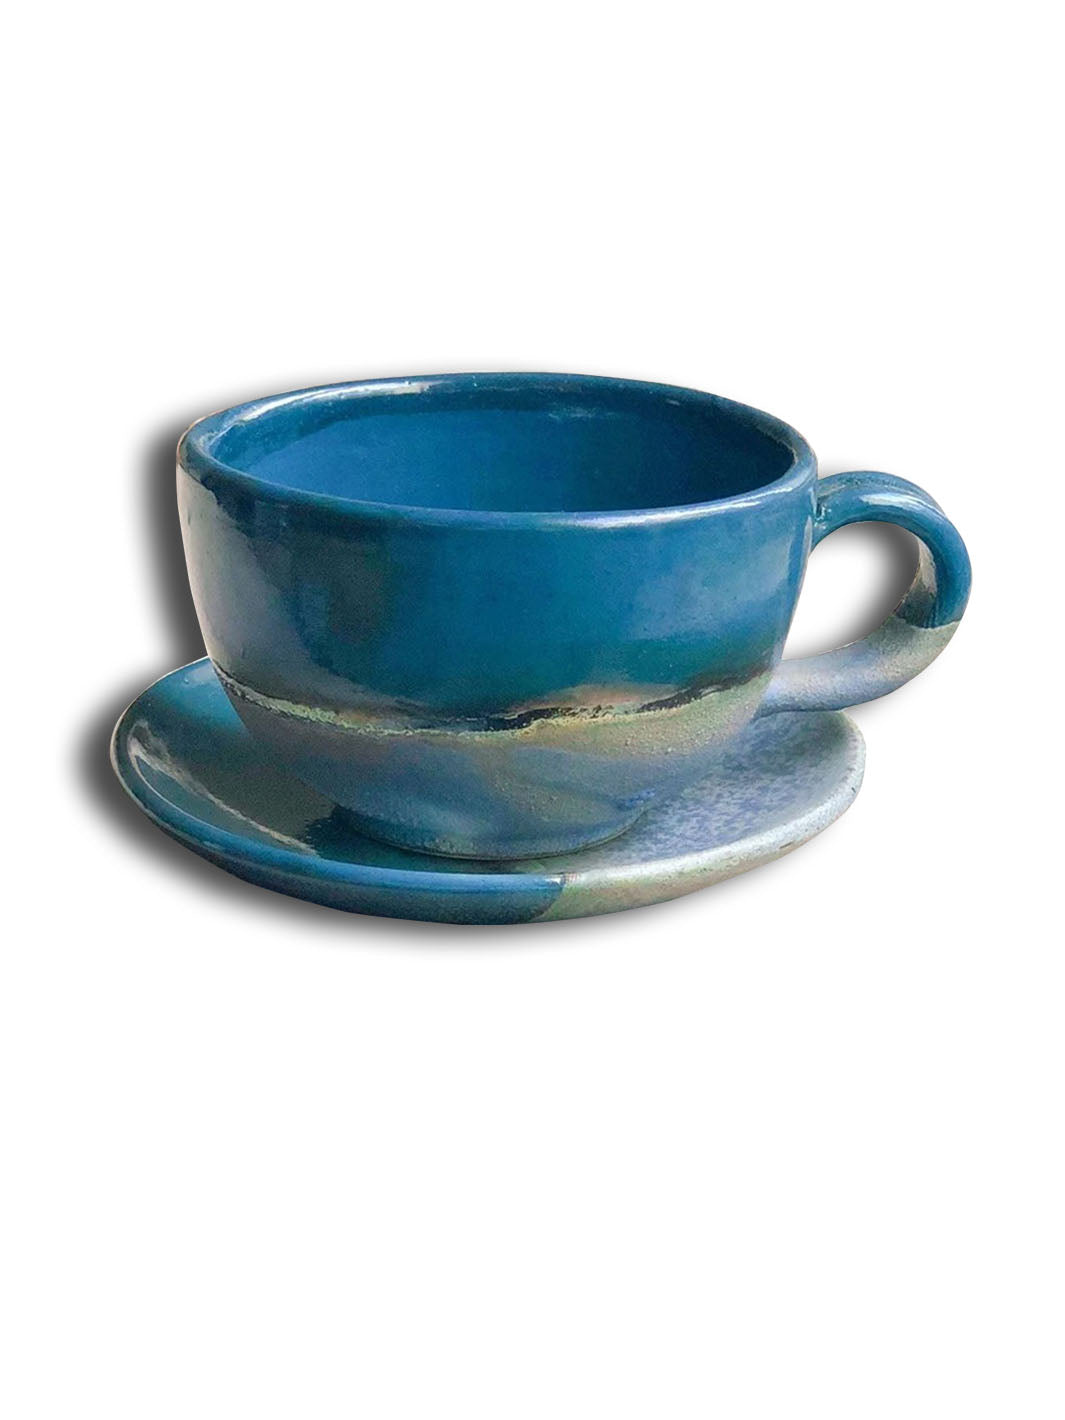 Artistic Handcrafted Peacock Ceramic Cappuccino Cup Deco Cups DCB0032